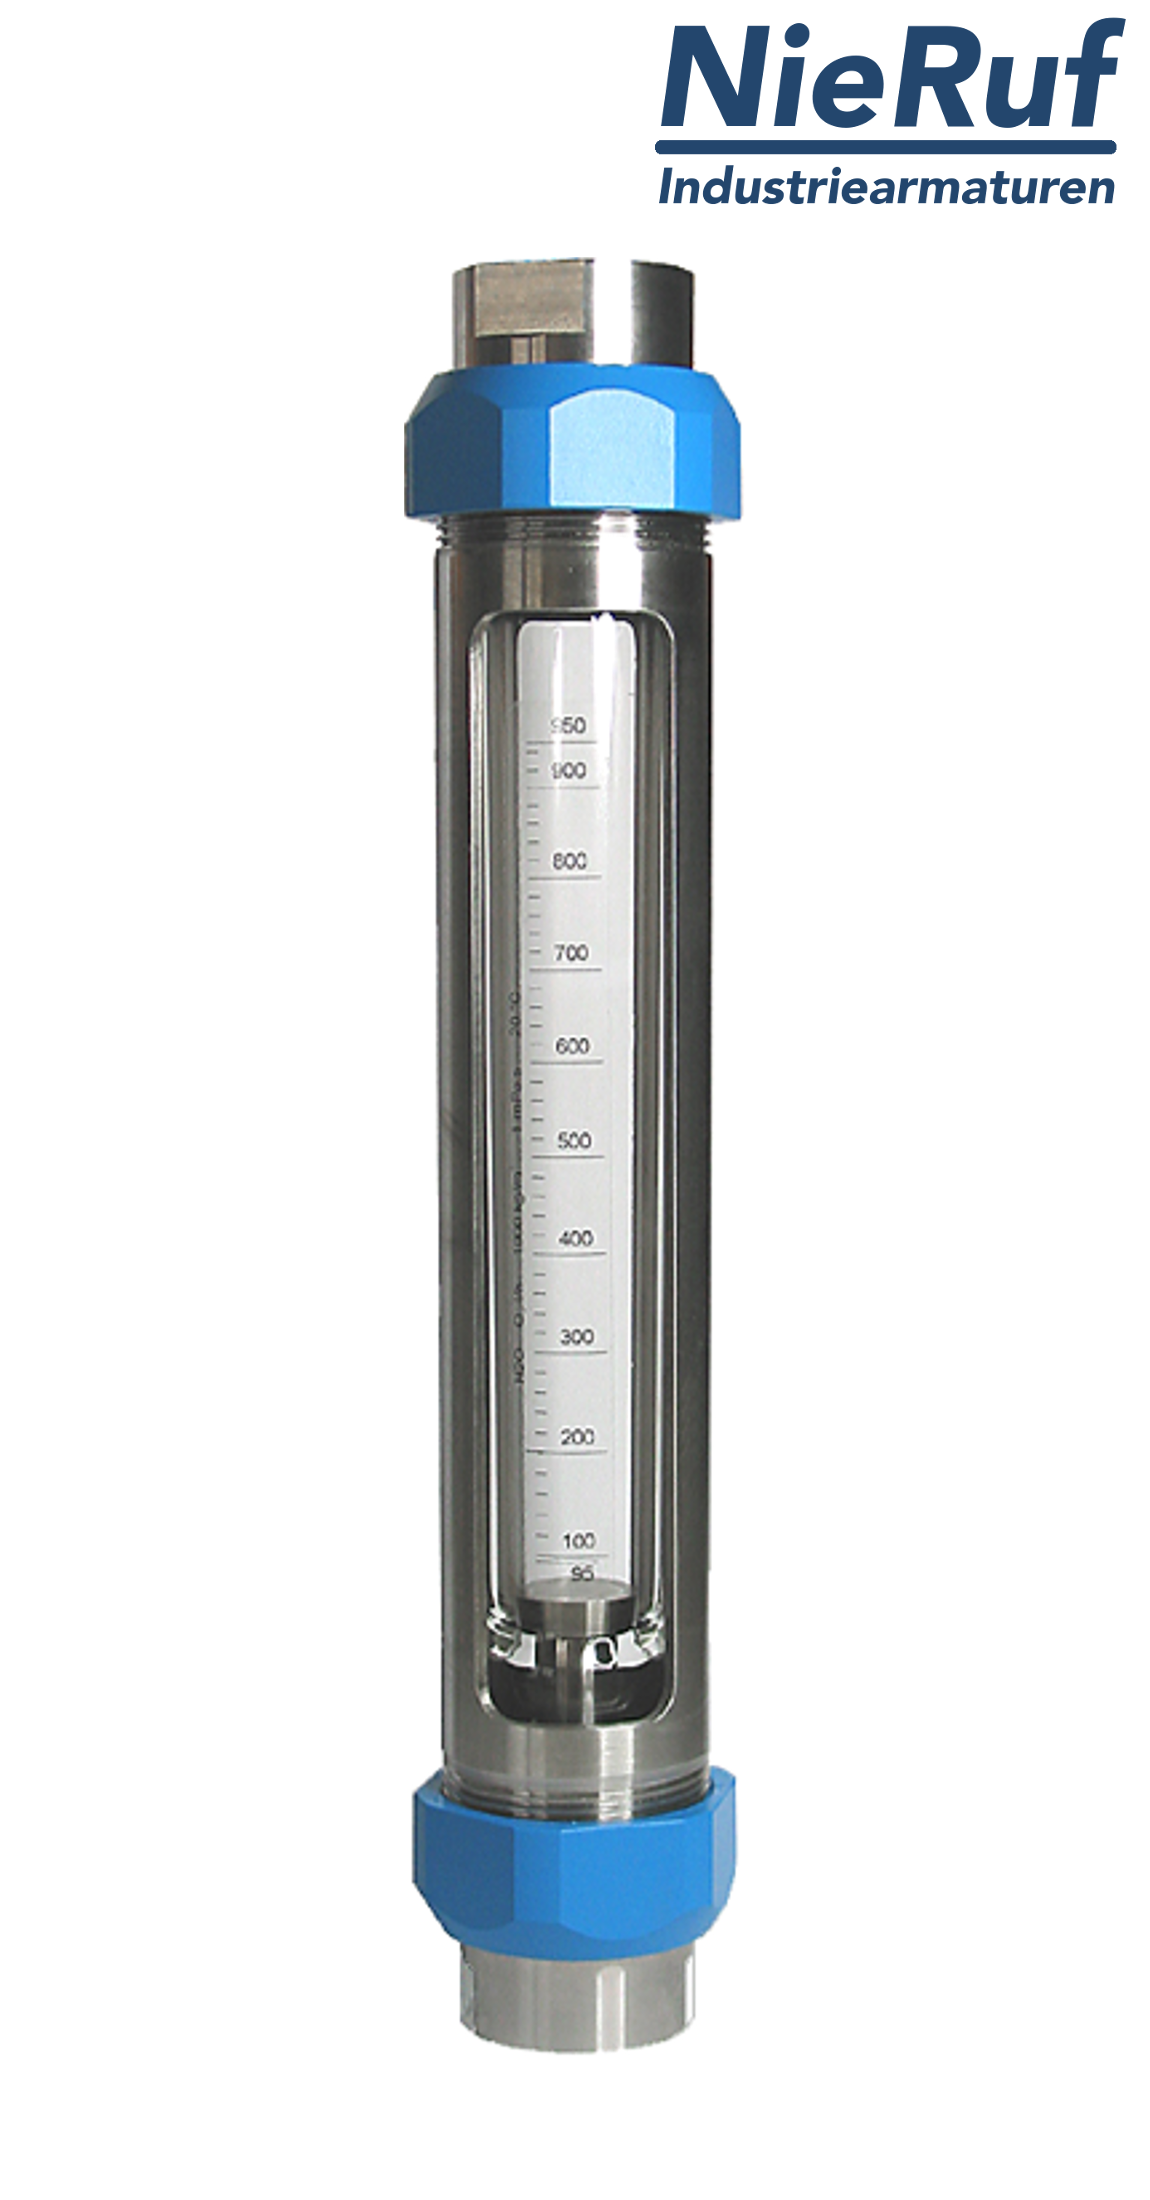 Variable area flowmeter stainless steel + borosilicate 3/4" inch 100.0 - 1000 l/h water EPDM